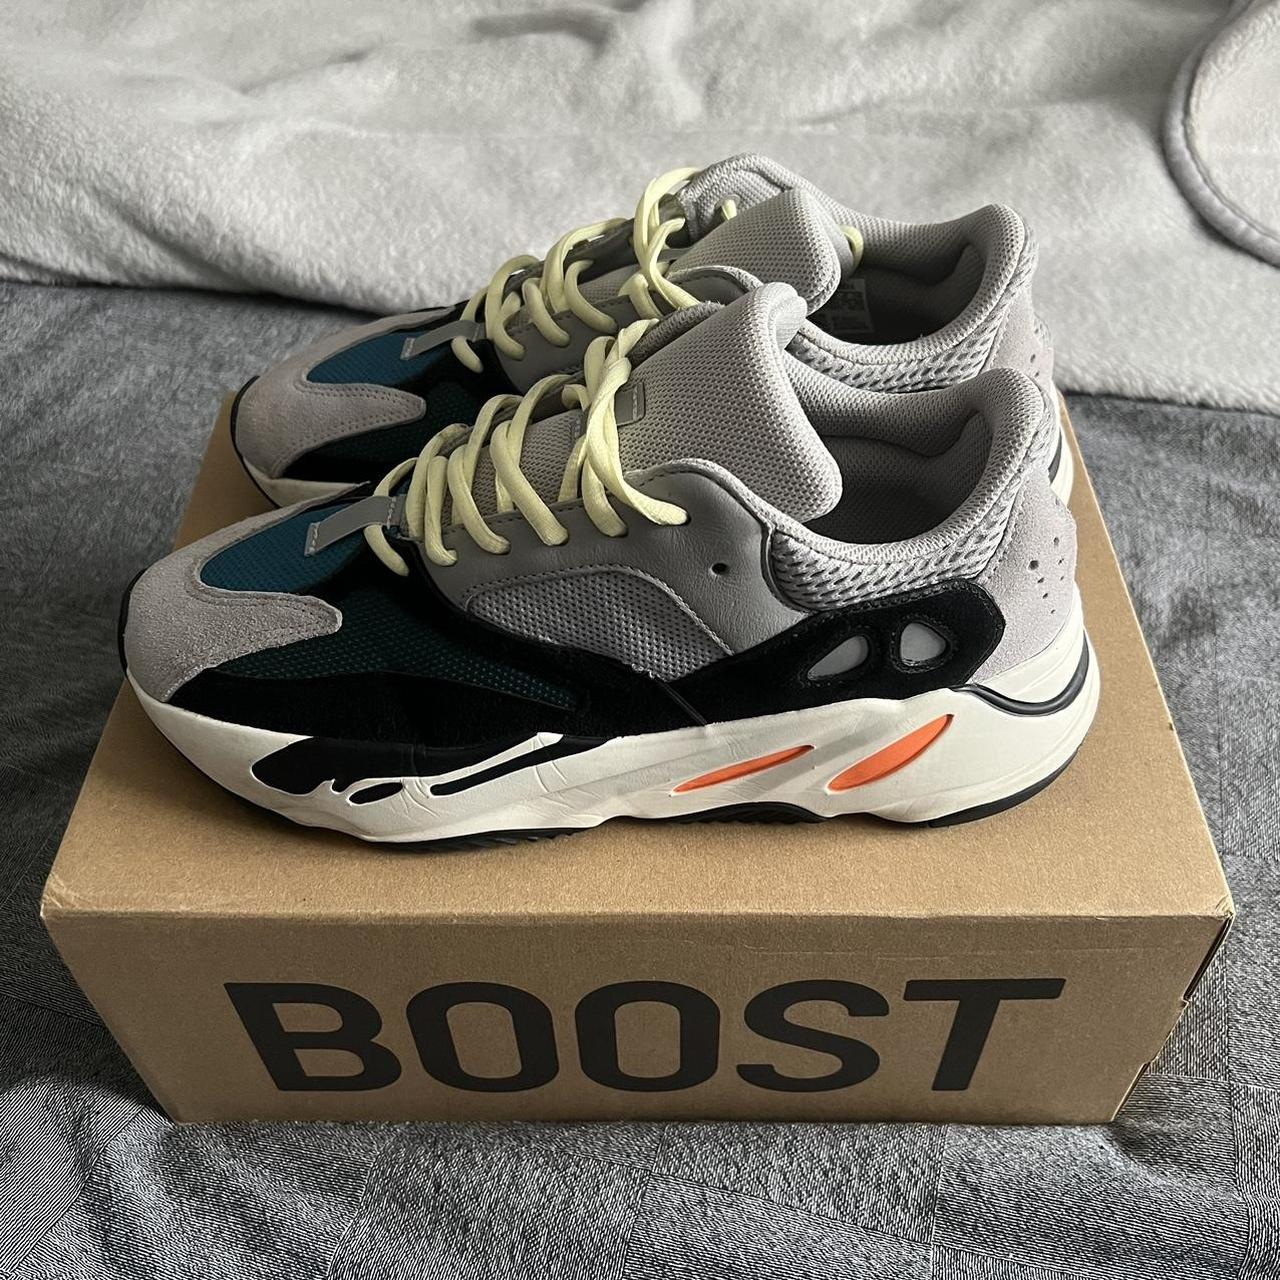 Yeezy 700 Wave Runner Size 9 Worn a couple of times - Depop